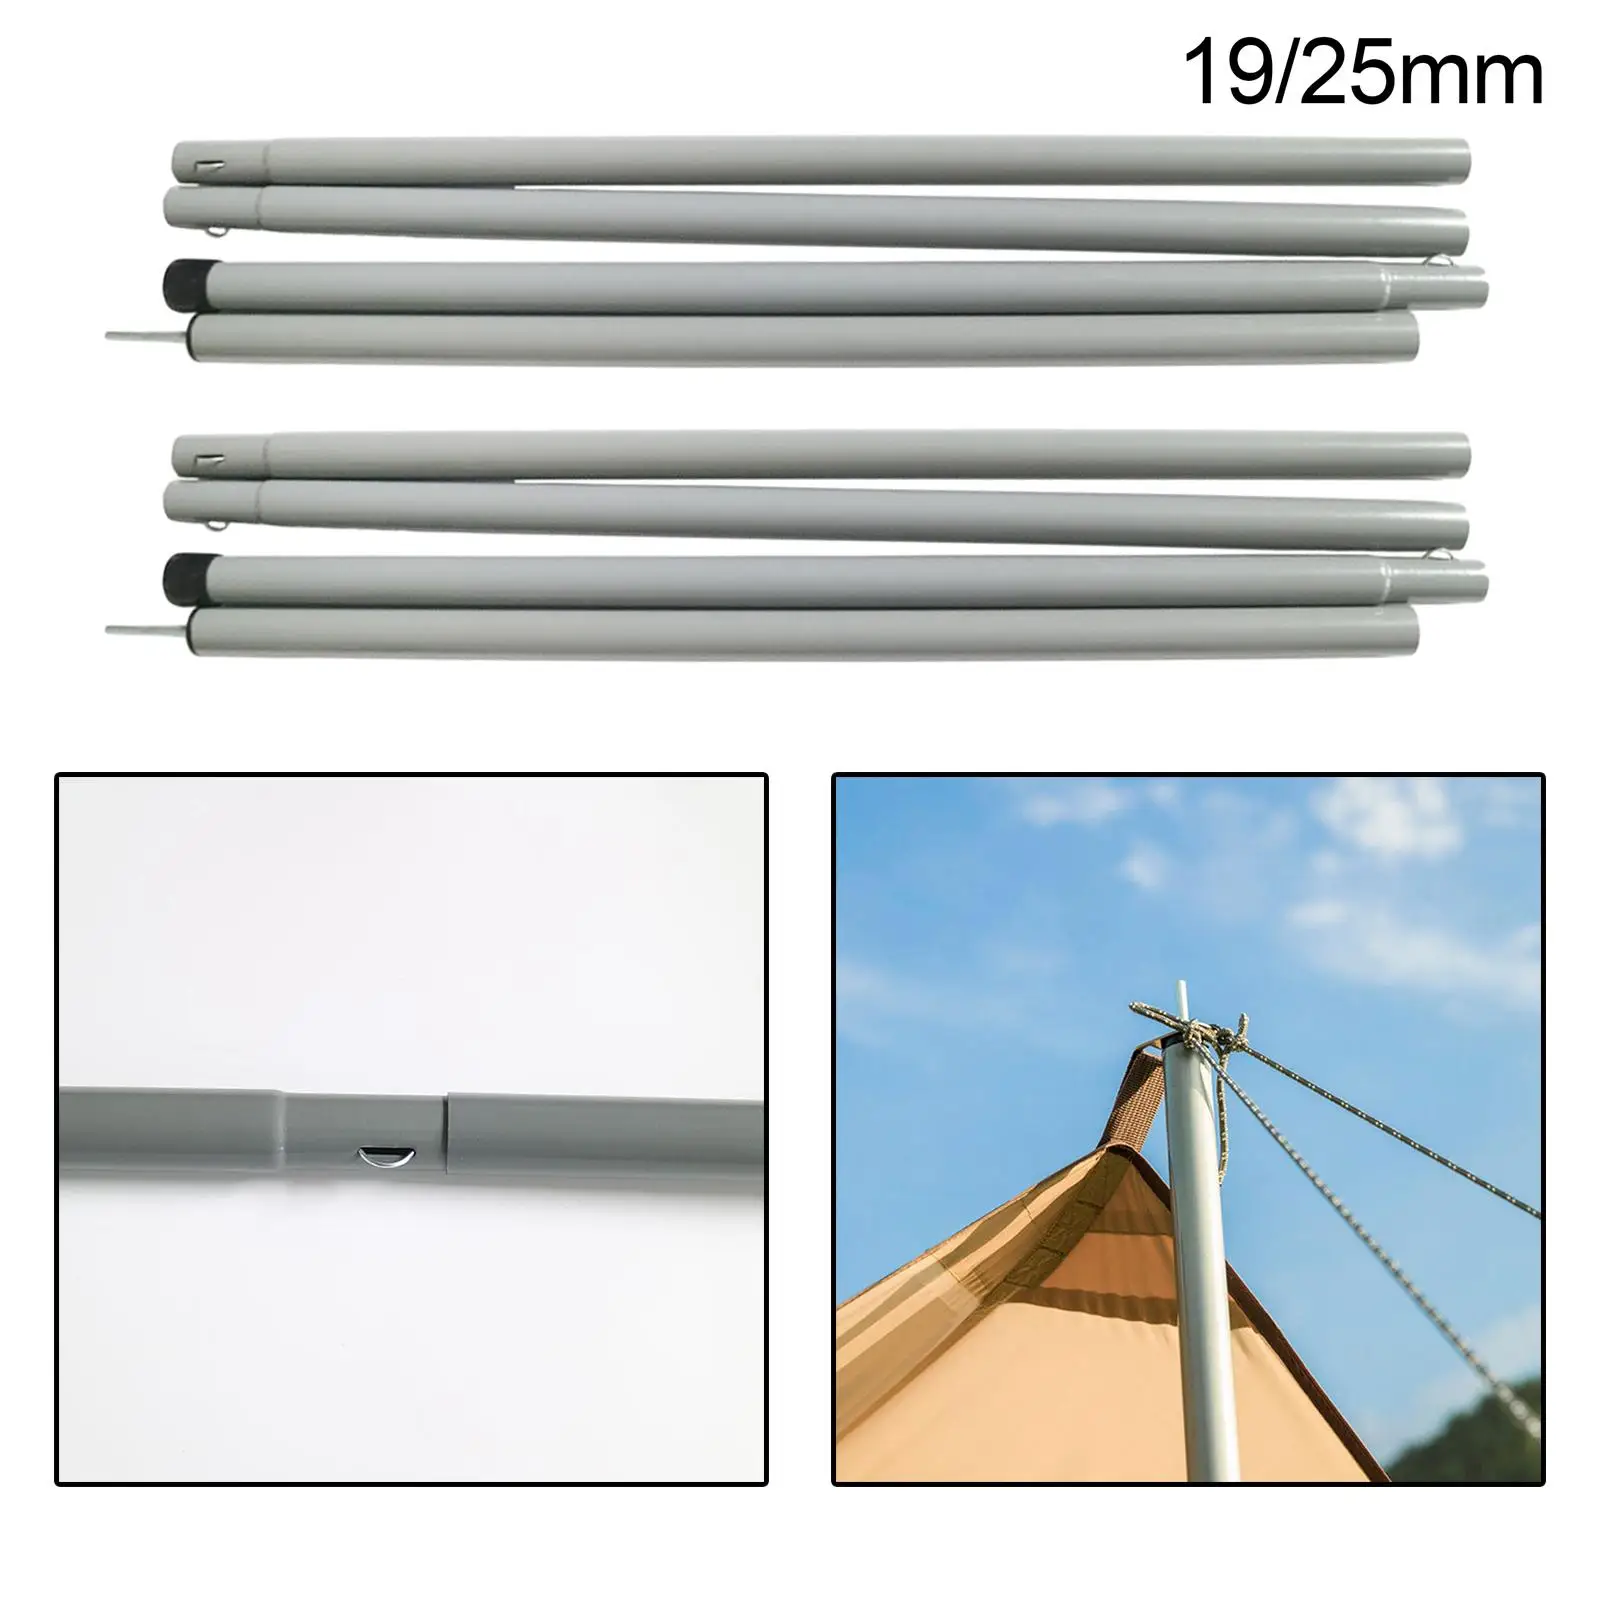 Camping Tent Rod Portable Rod Holder Support Rods Durable Universal Replacement for Outdoor Canopy Activities